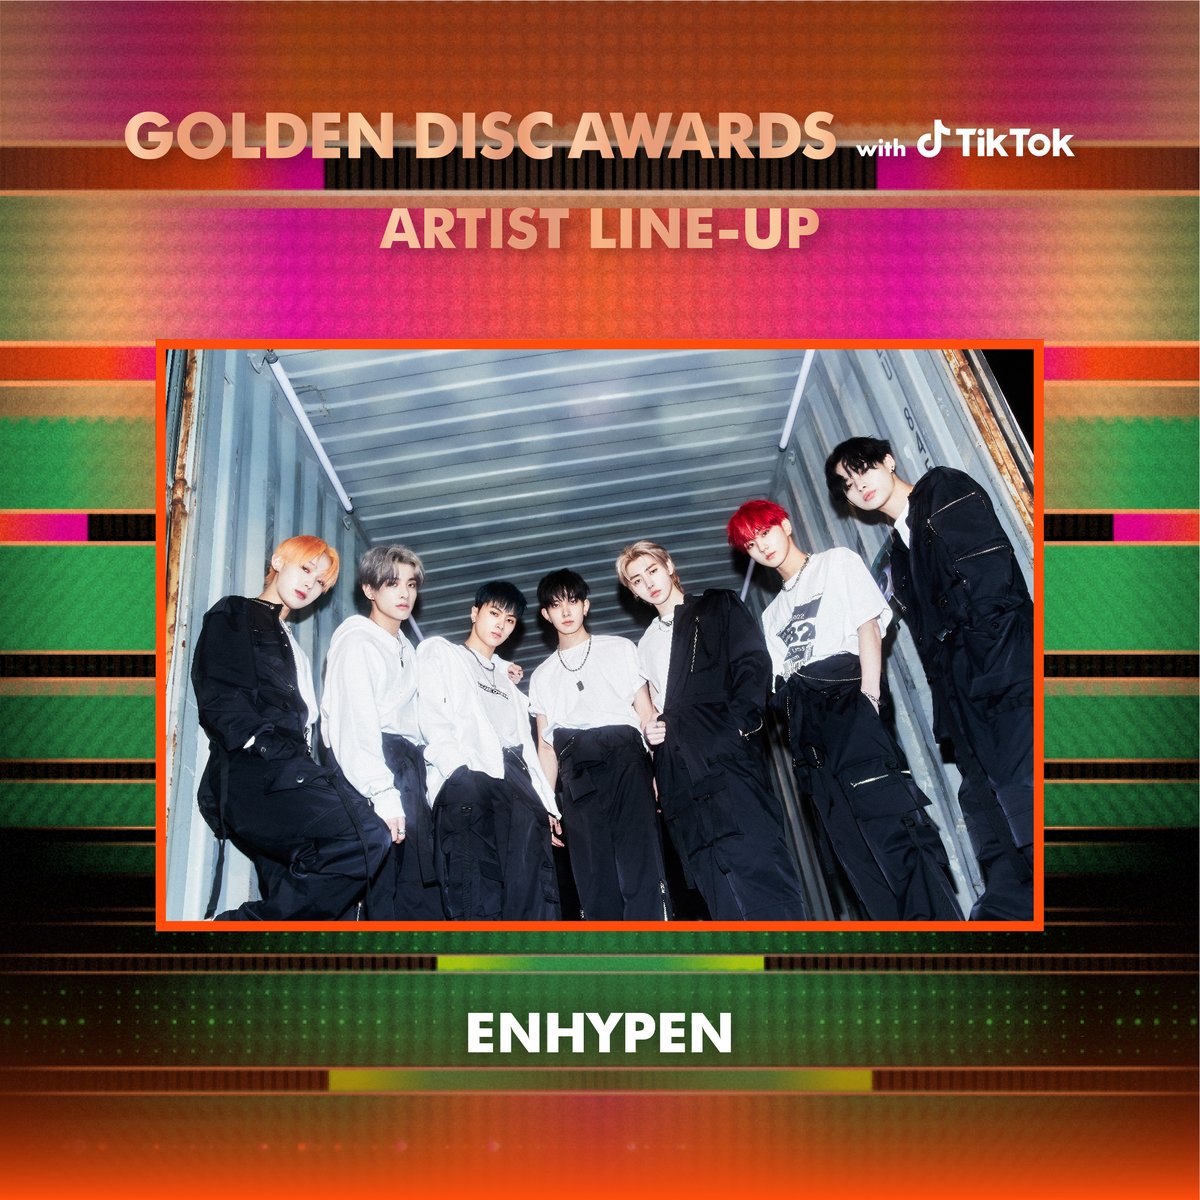 1st Artist Lineup Announcement. Please welcome #ENHYPEN who will join the 37th #GDA ! #골든디스크어워즈 #goldendiscawards #골든디스크 #goldendisc #gda #artistlineup #엔하이픈